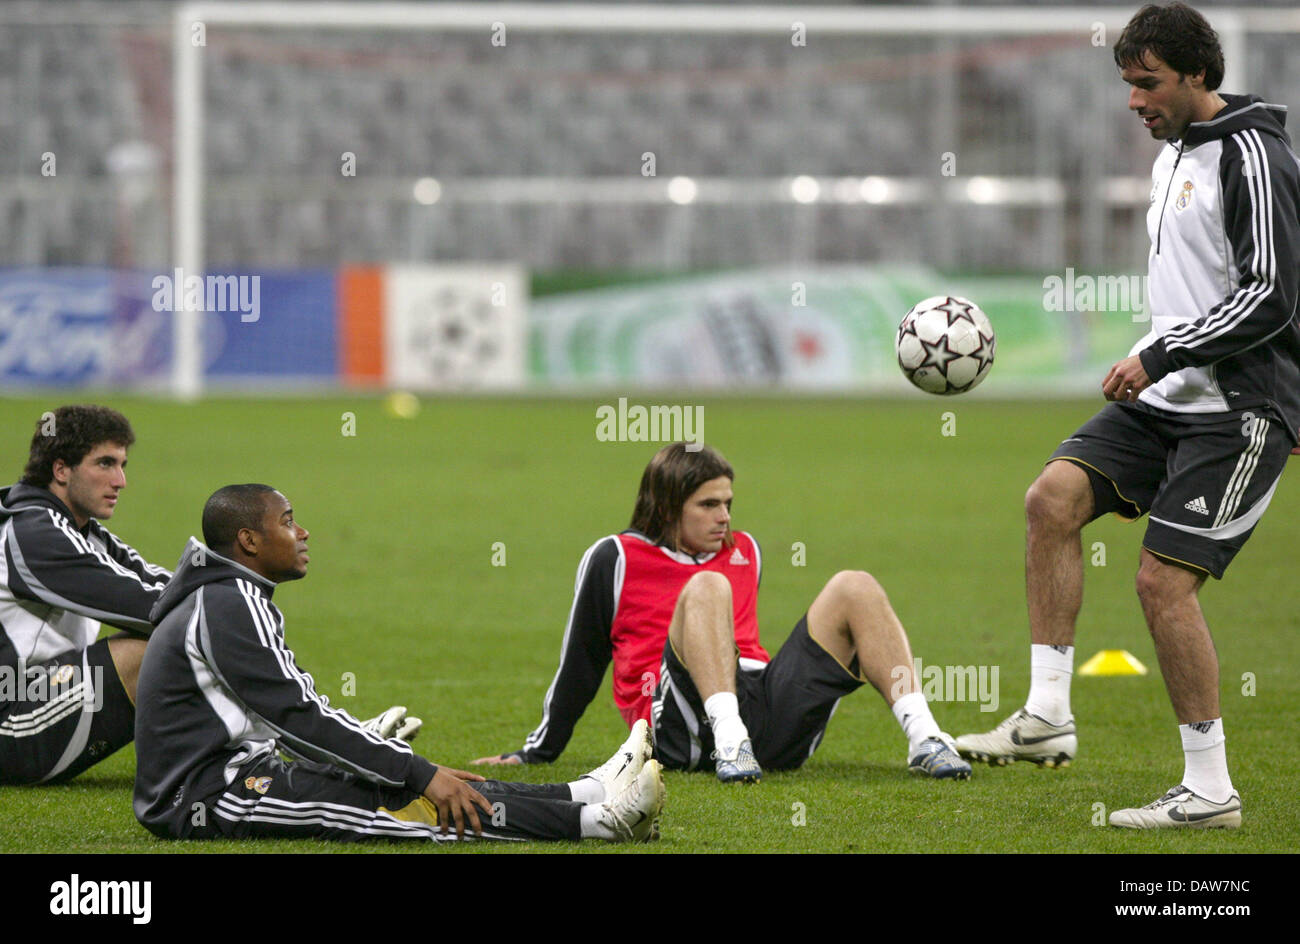 Real Madrid players (L-R) Gonzalo Higuain, Robinho and Fernando Gago watch their forward Ruud van Nistelrooy during a training session in Munich, Germany, Tuesday 06 March 2007. Real Madrid faces Bayern Munich on Wednesday 07 March 2007 in Munich in the second leg match of Champions League round of sixteen. Photo: Andreas Gebert Stock Photo